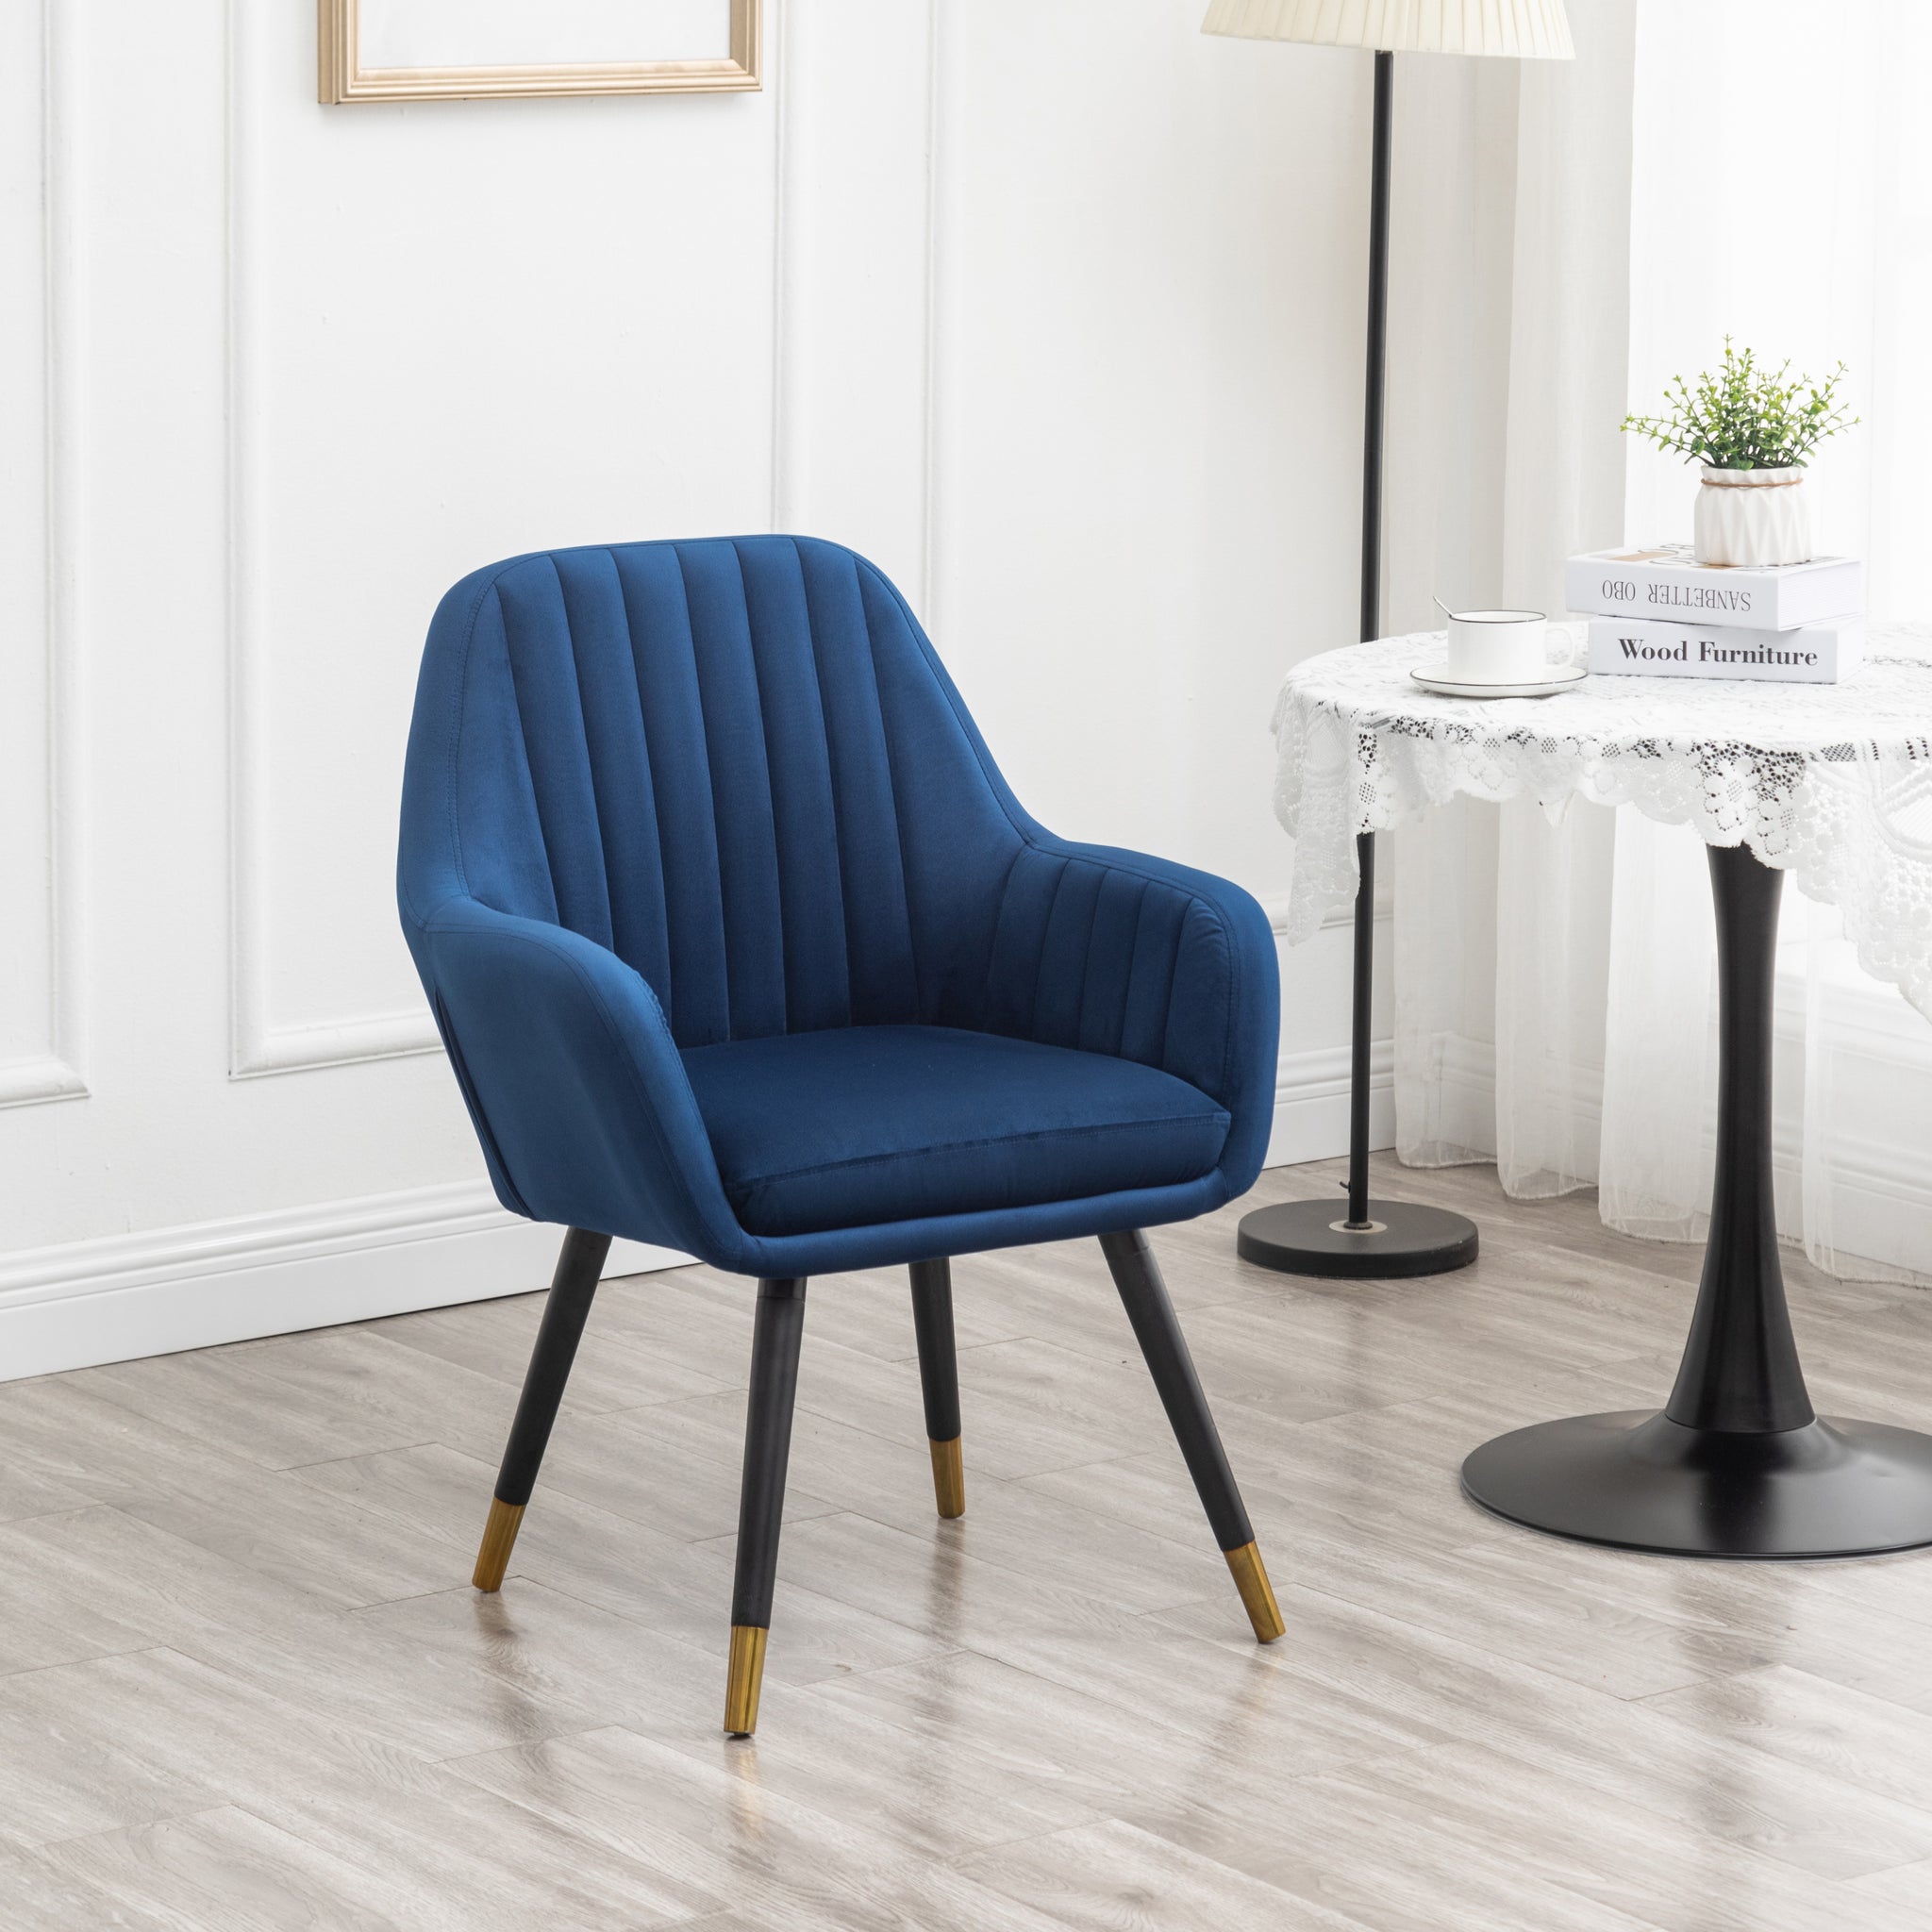 Tuchico Contemporary Velvet Upholstered Accent Chair blue-polyester